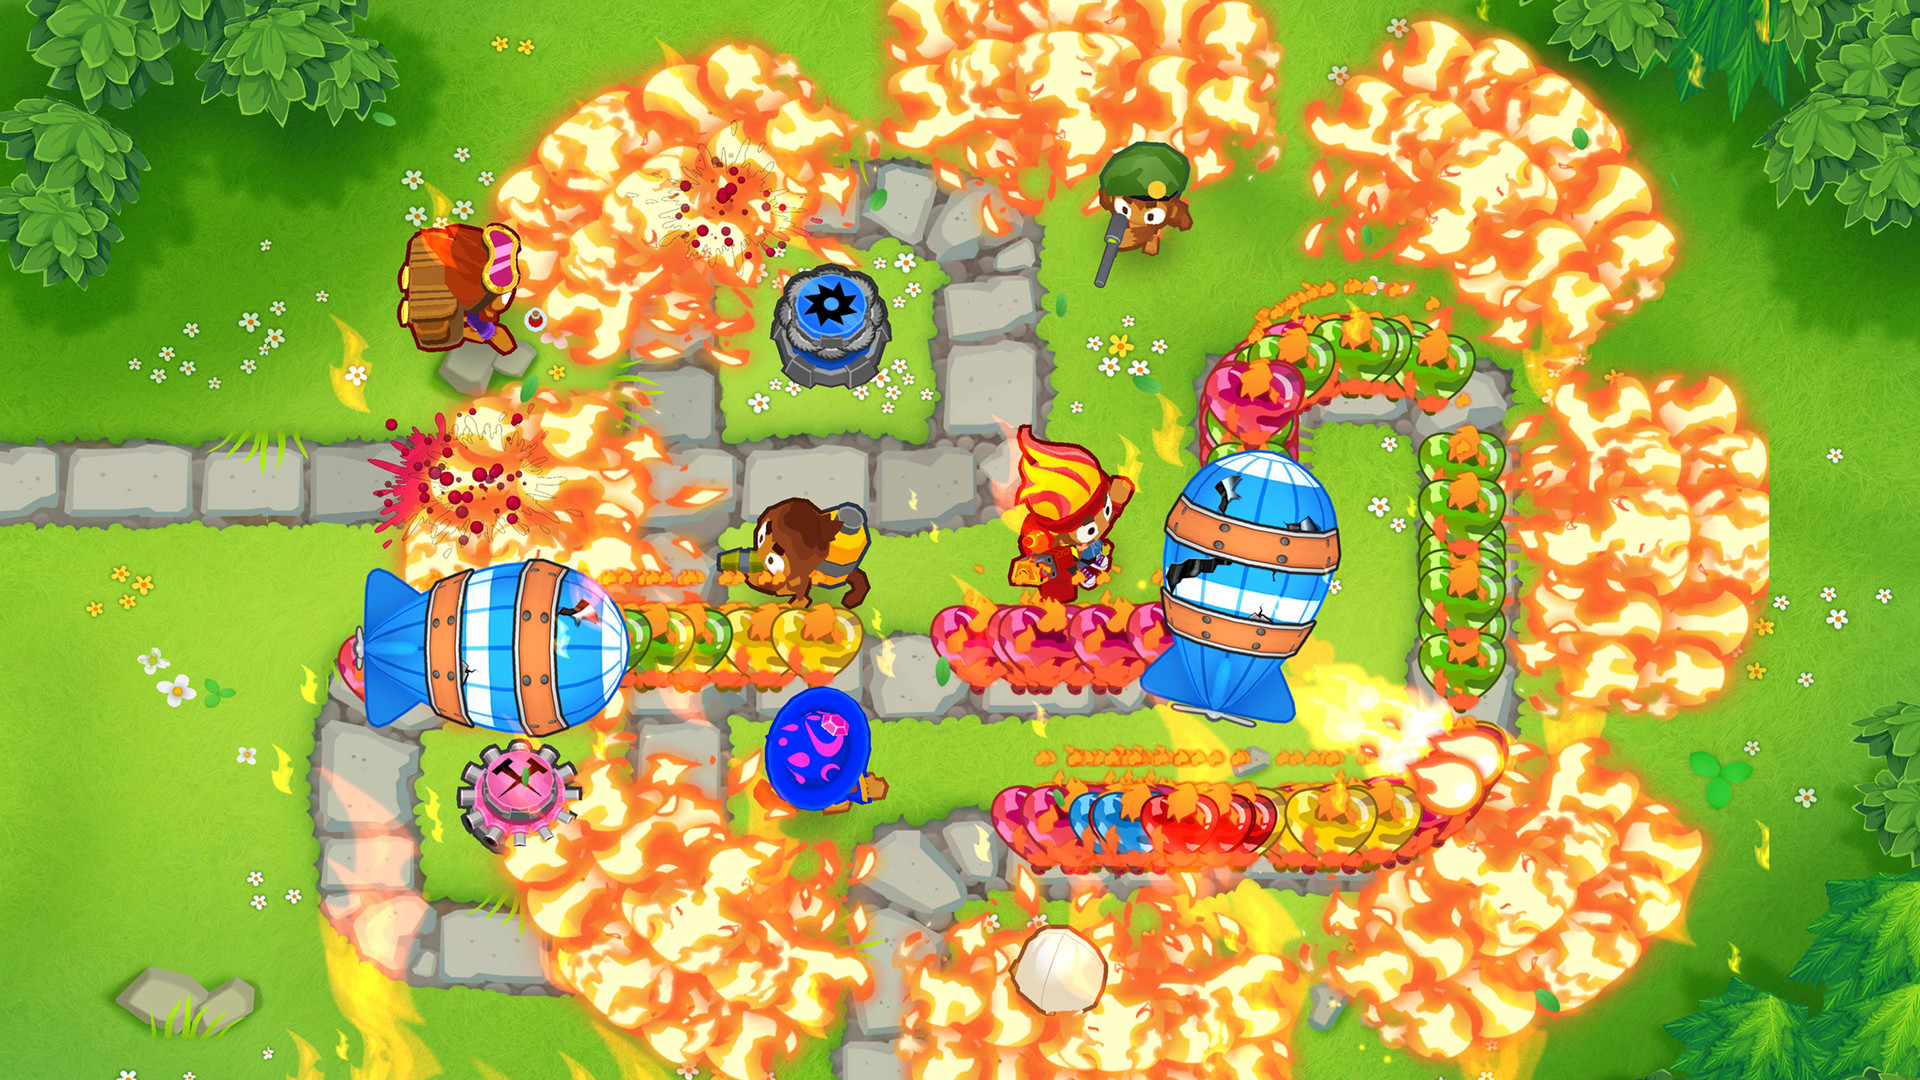 Video Game Bloons TD 6 HD Wallpaper | Background Image